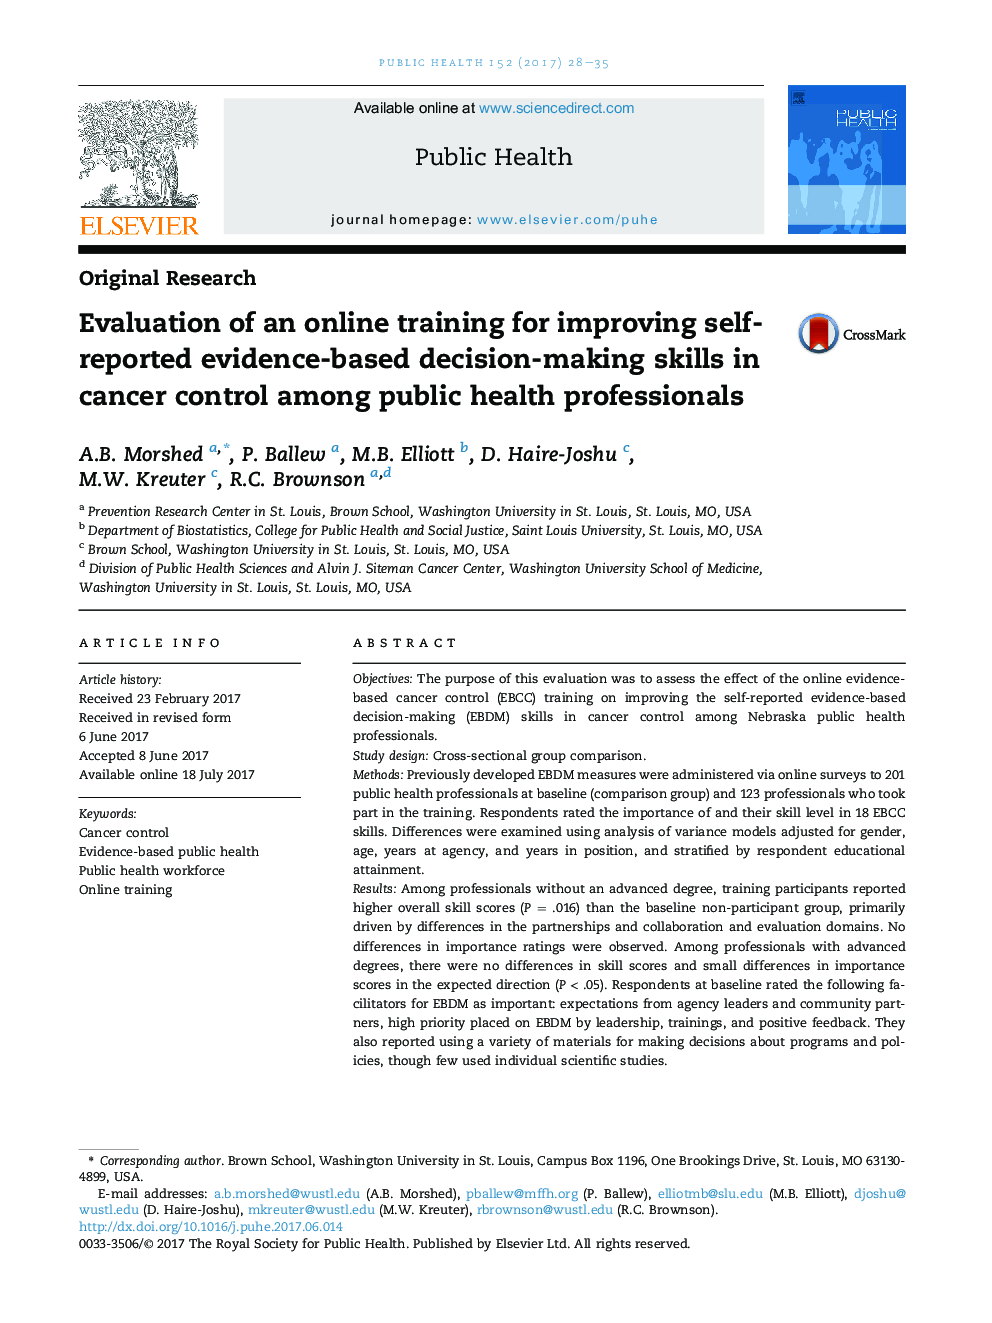 Evaluation of an online training for improving self-reported evidence-based decision-making skills in cancer control among public health professionals